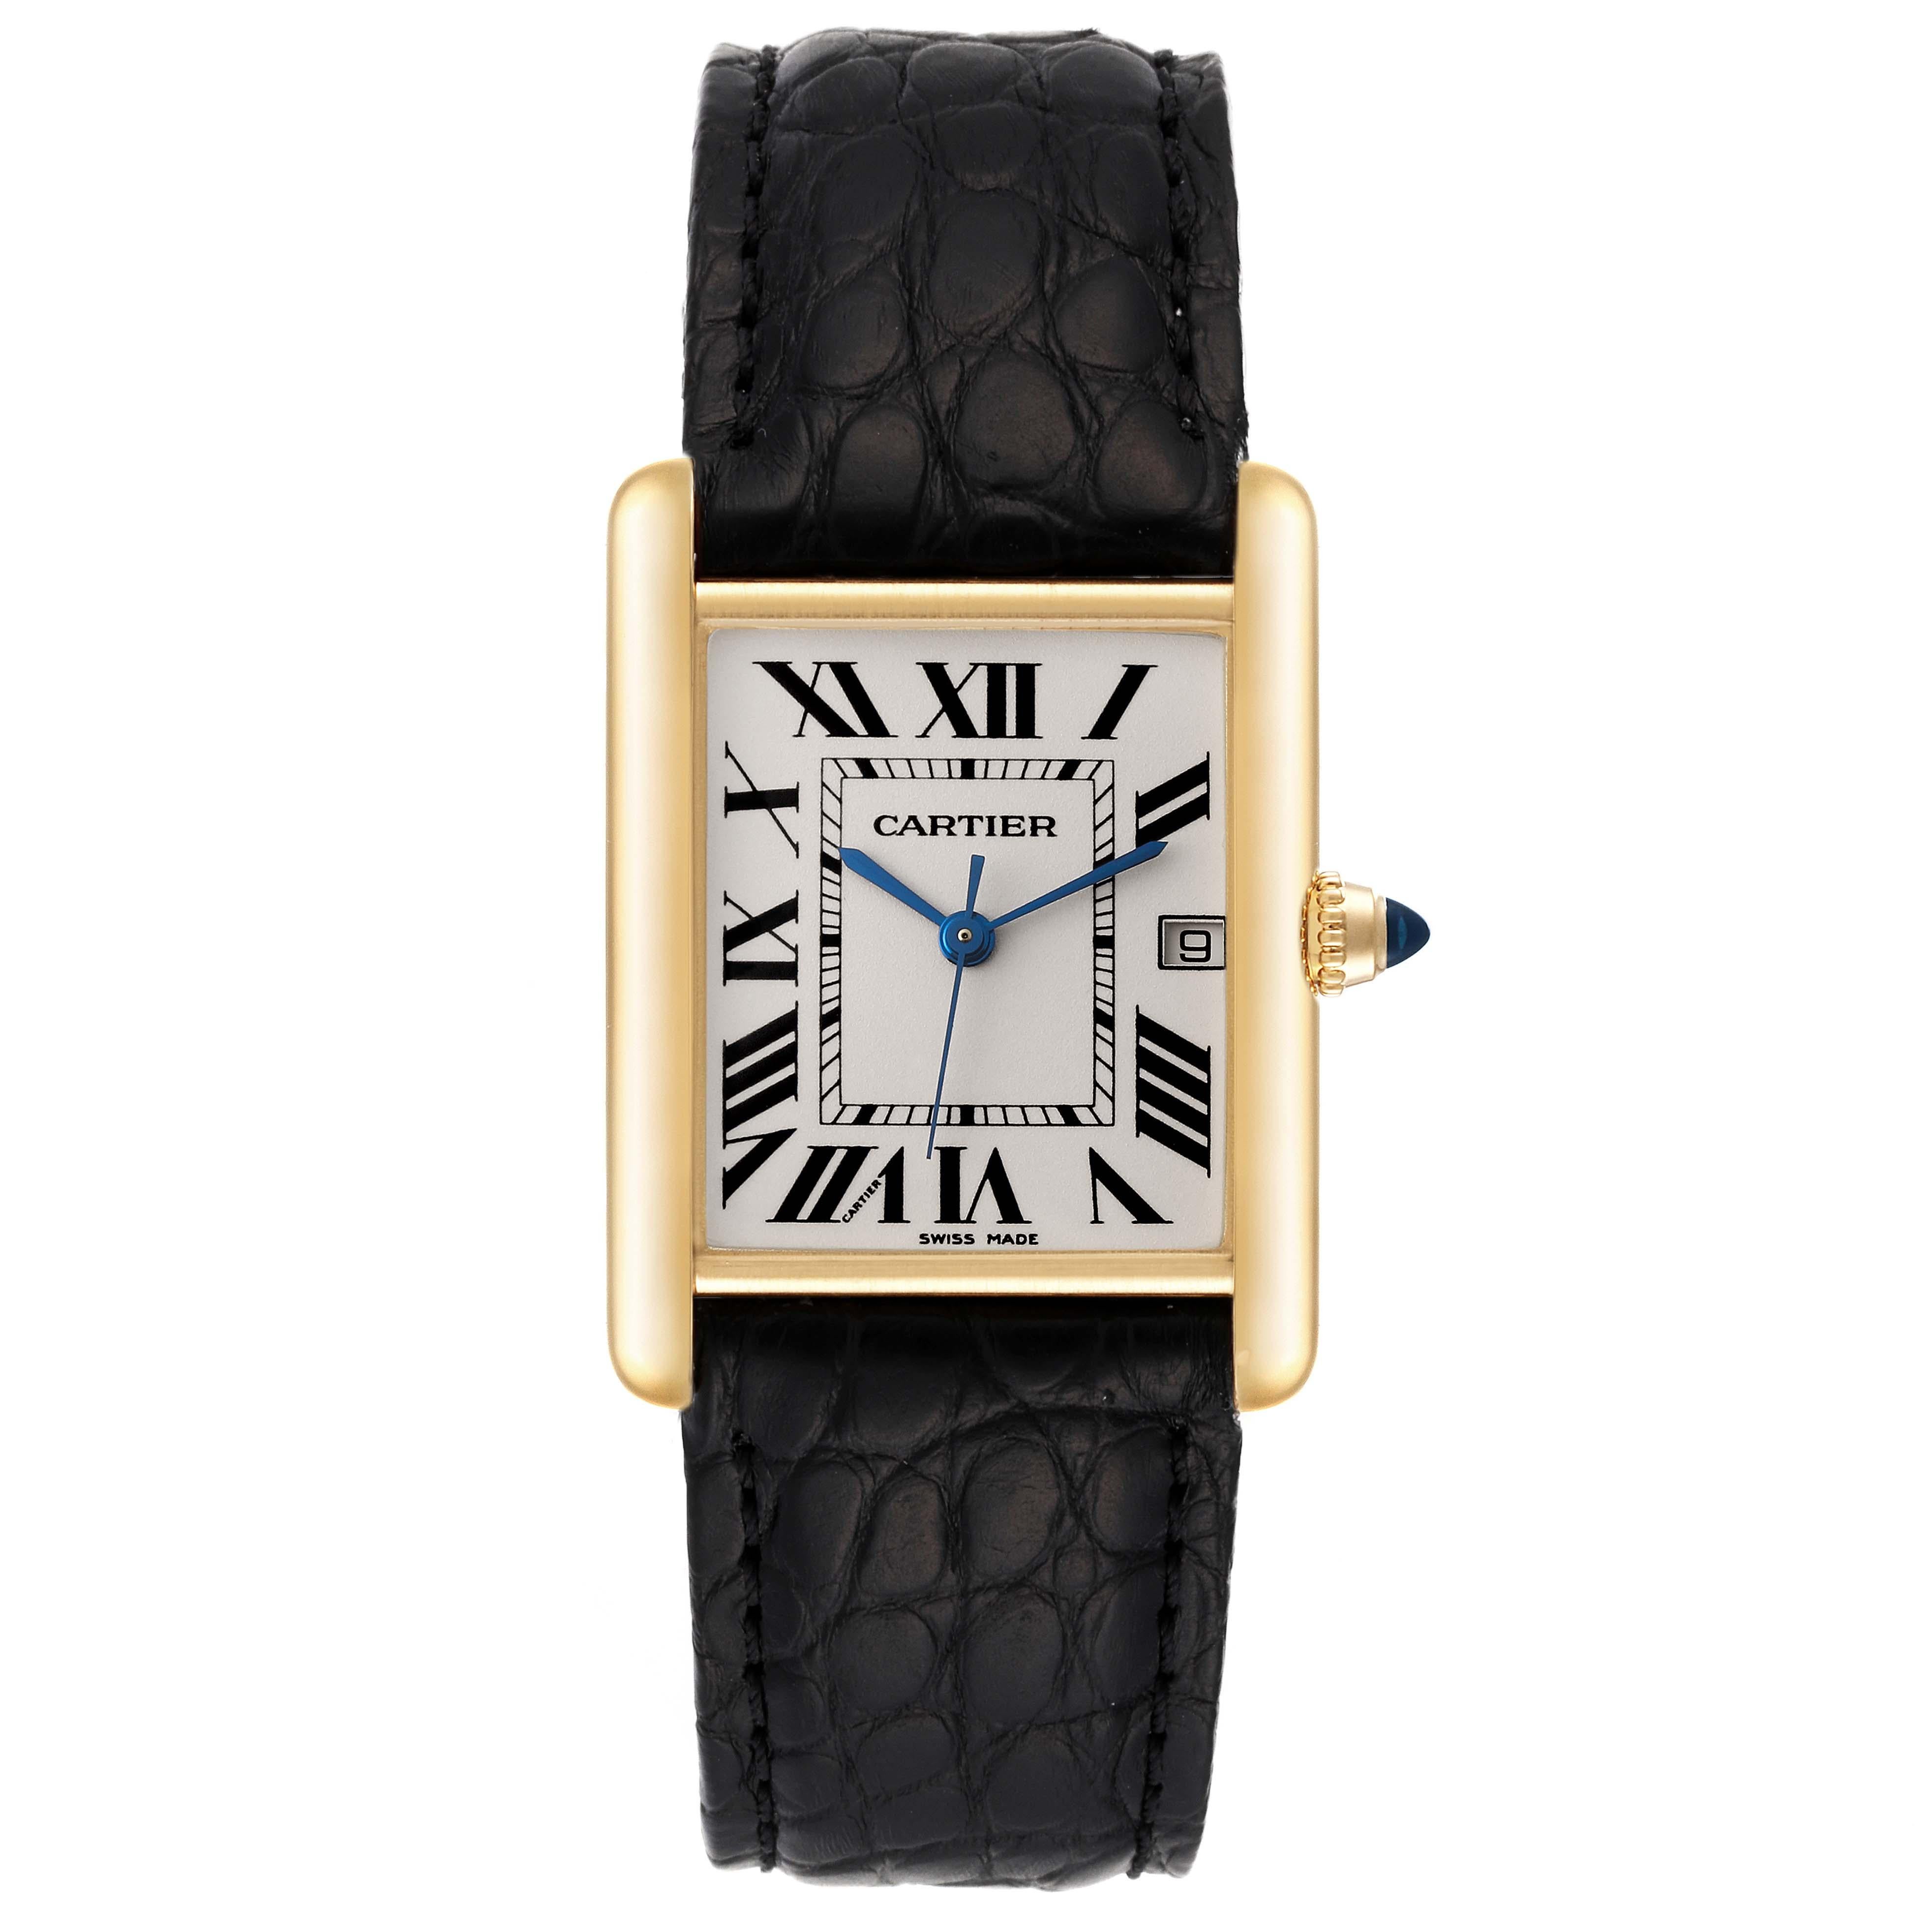 Cartier Tank Louis Yellow Gold Black Strap Mens Watch W1529756. Quartz movement. 18k yellow gold case 25.0 x 33.0 mm. Circular grained crown set with a blue sapphire cabochon. . Scratch resistant sapphire crystal. Silvered grained dial. Black roman